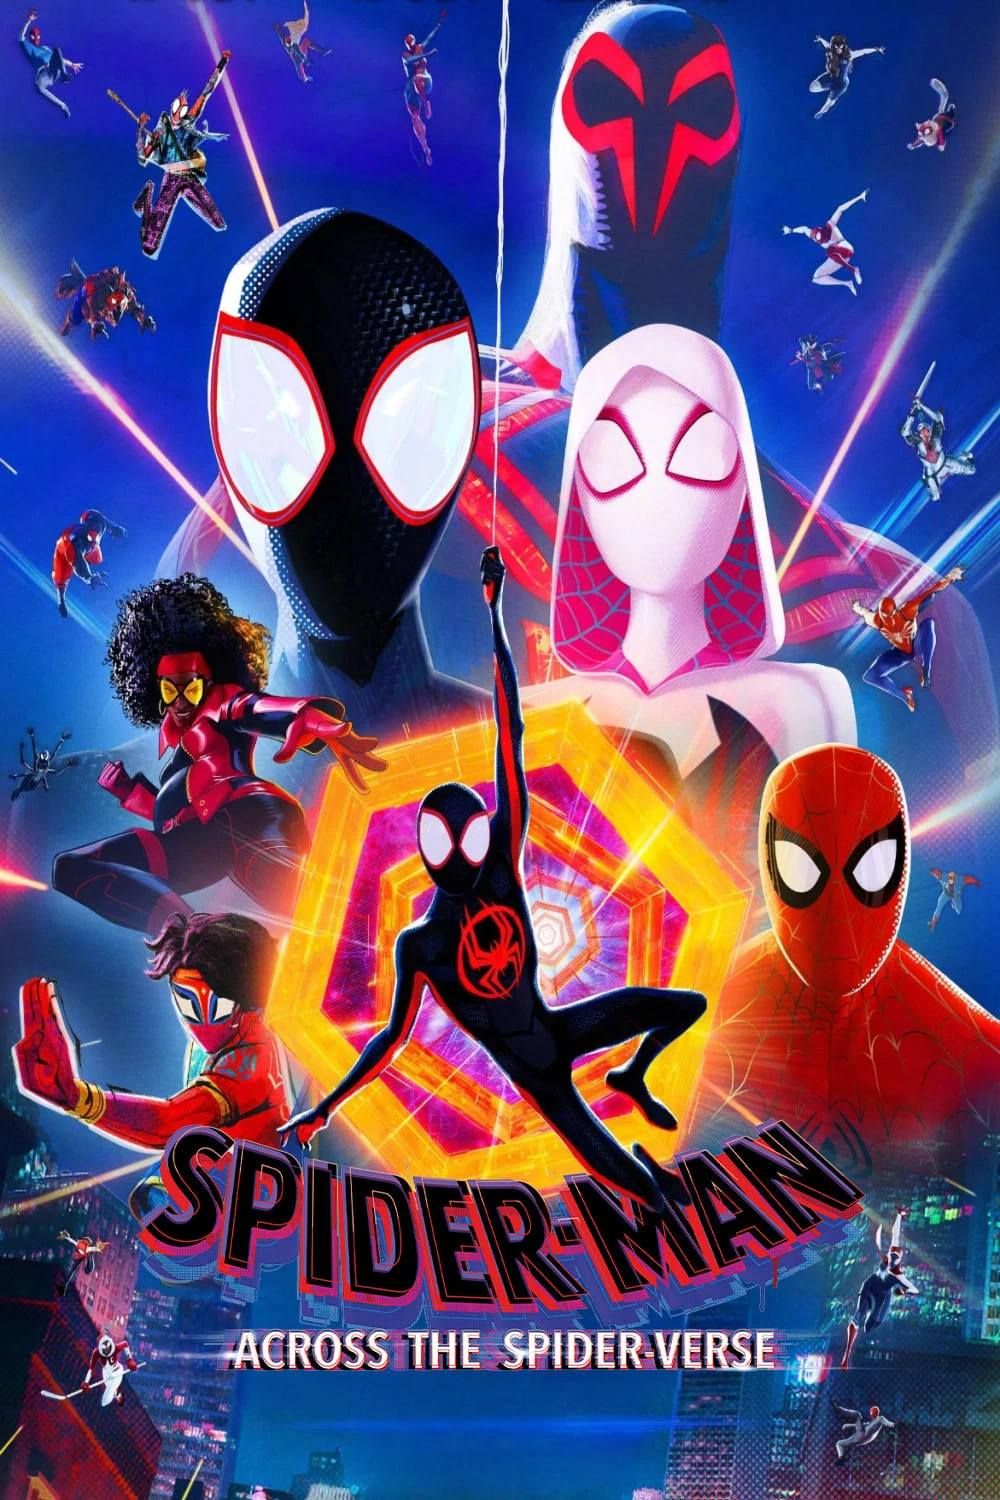 Family Movie @ Main: Spider-Man: Across the Spider-Verse (1st showing)